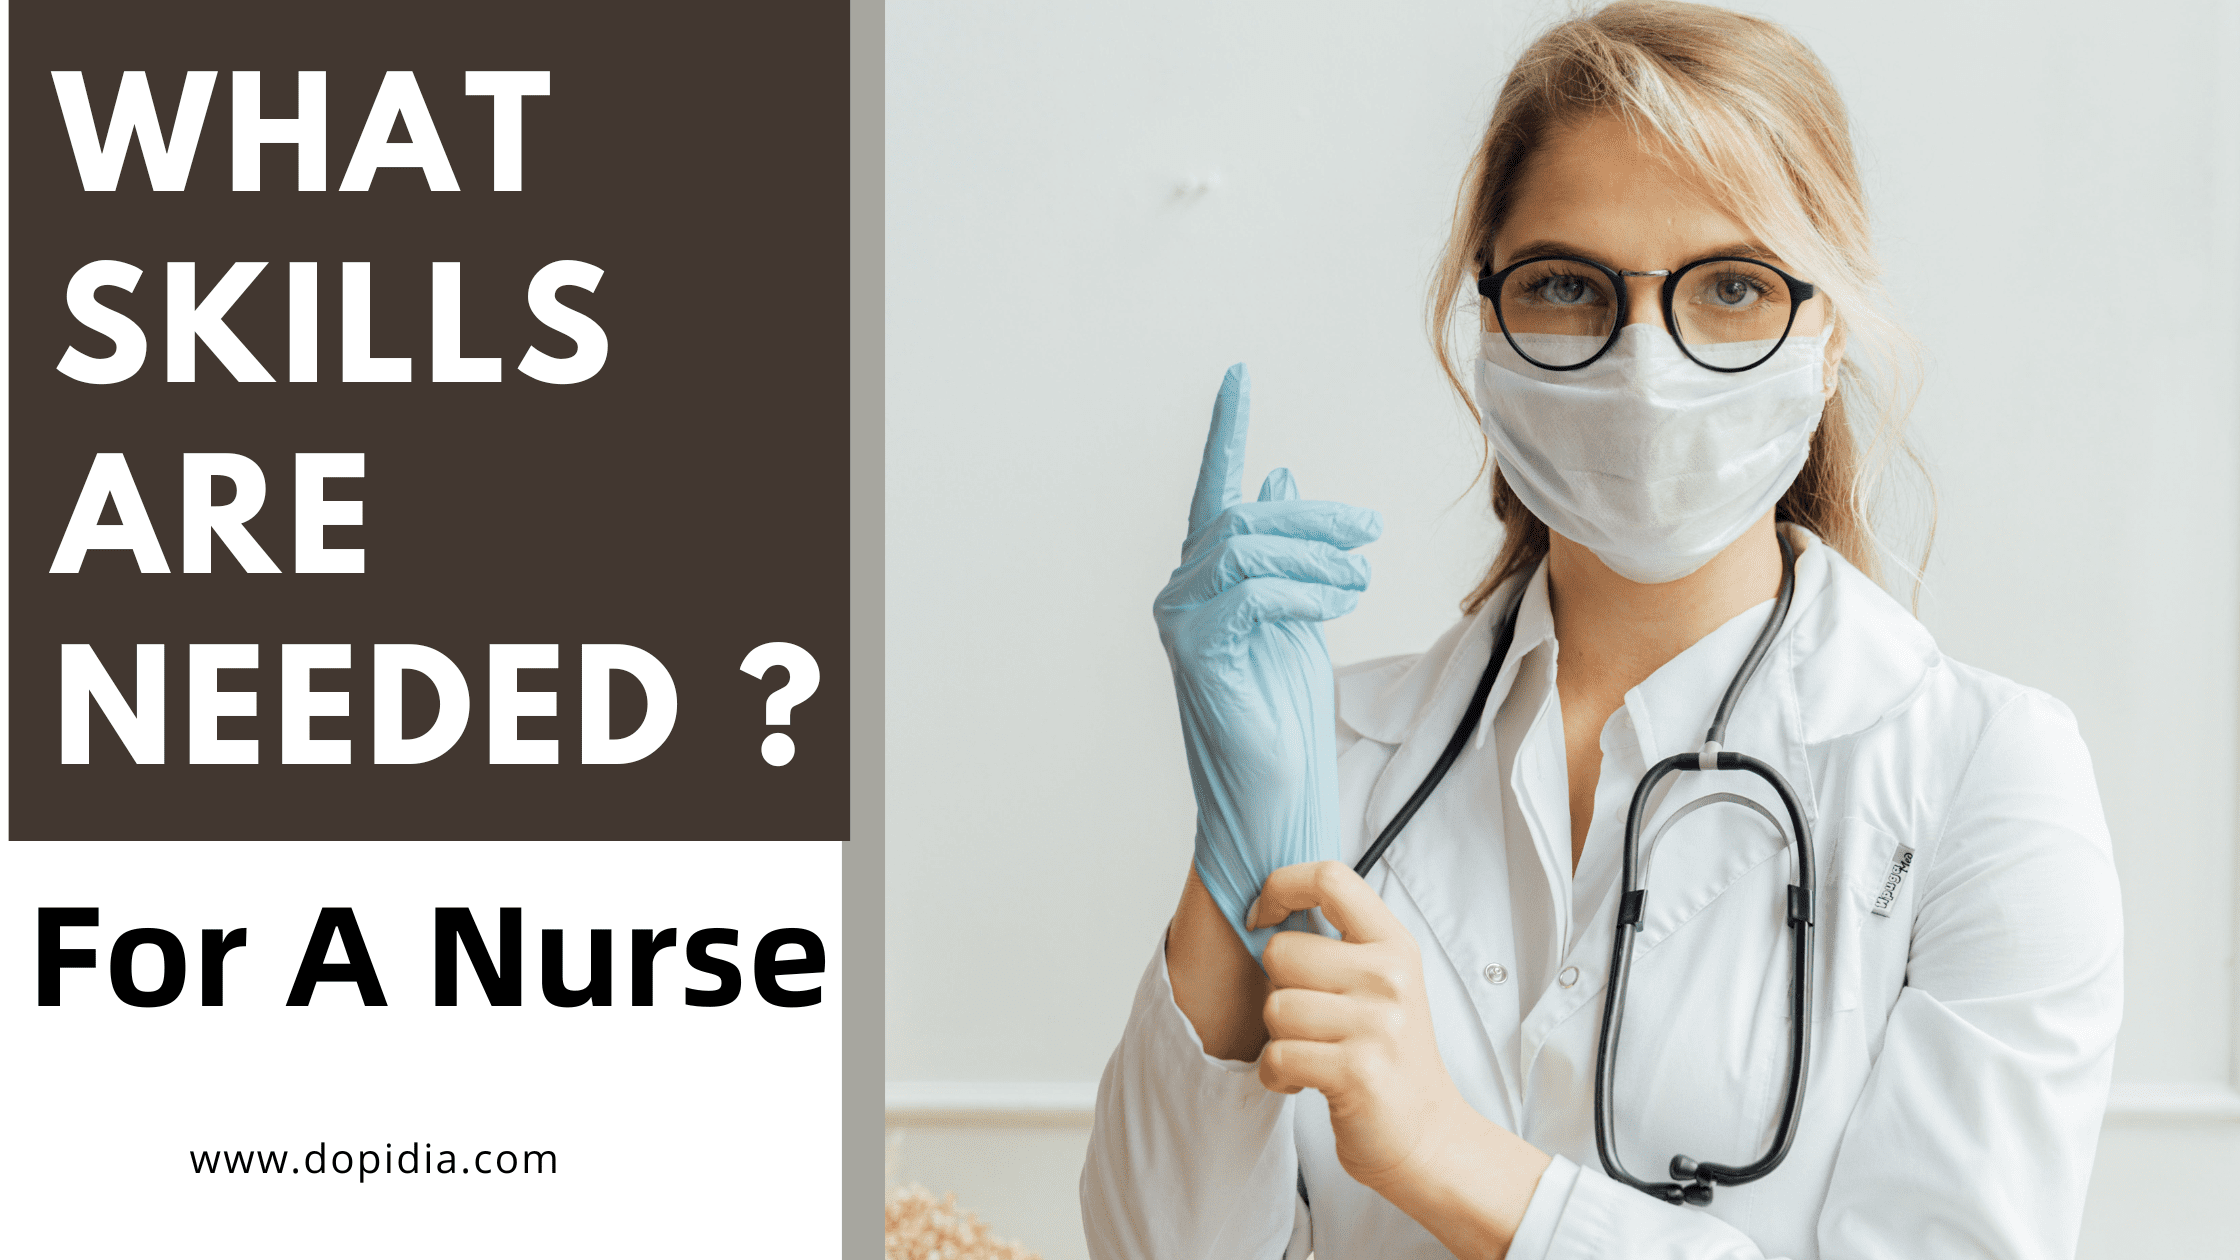 What skills are needed for a nurse?